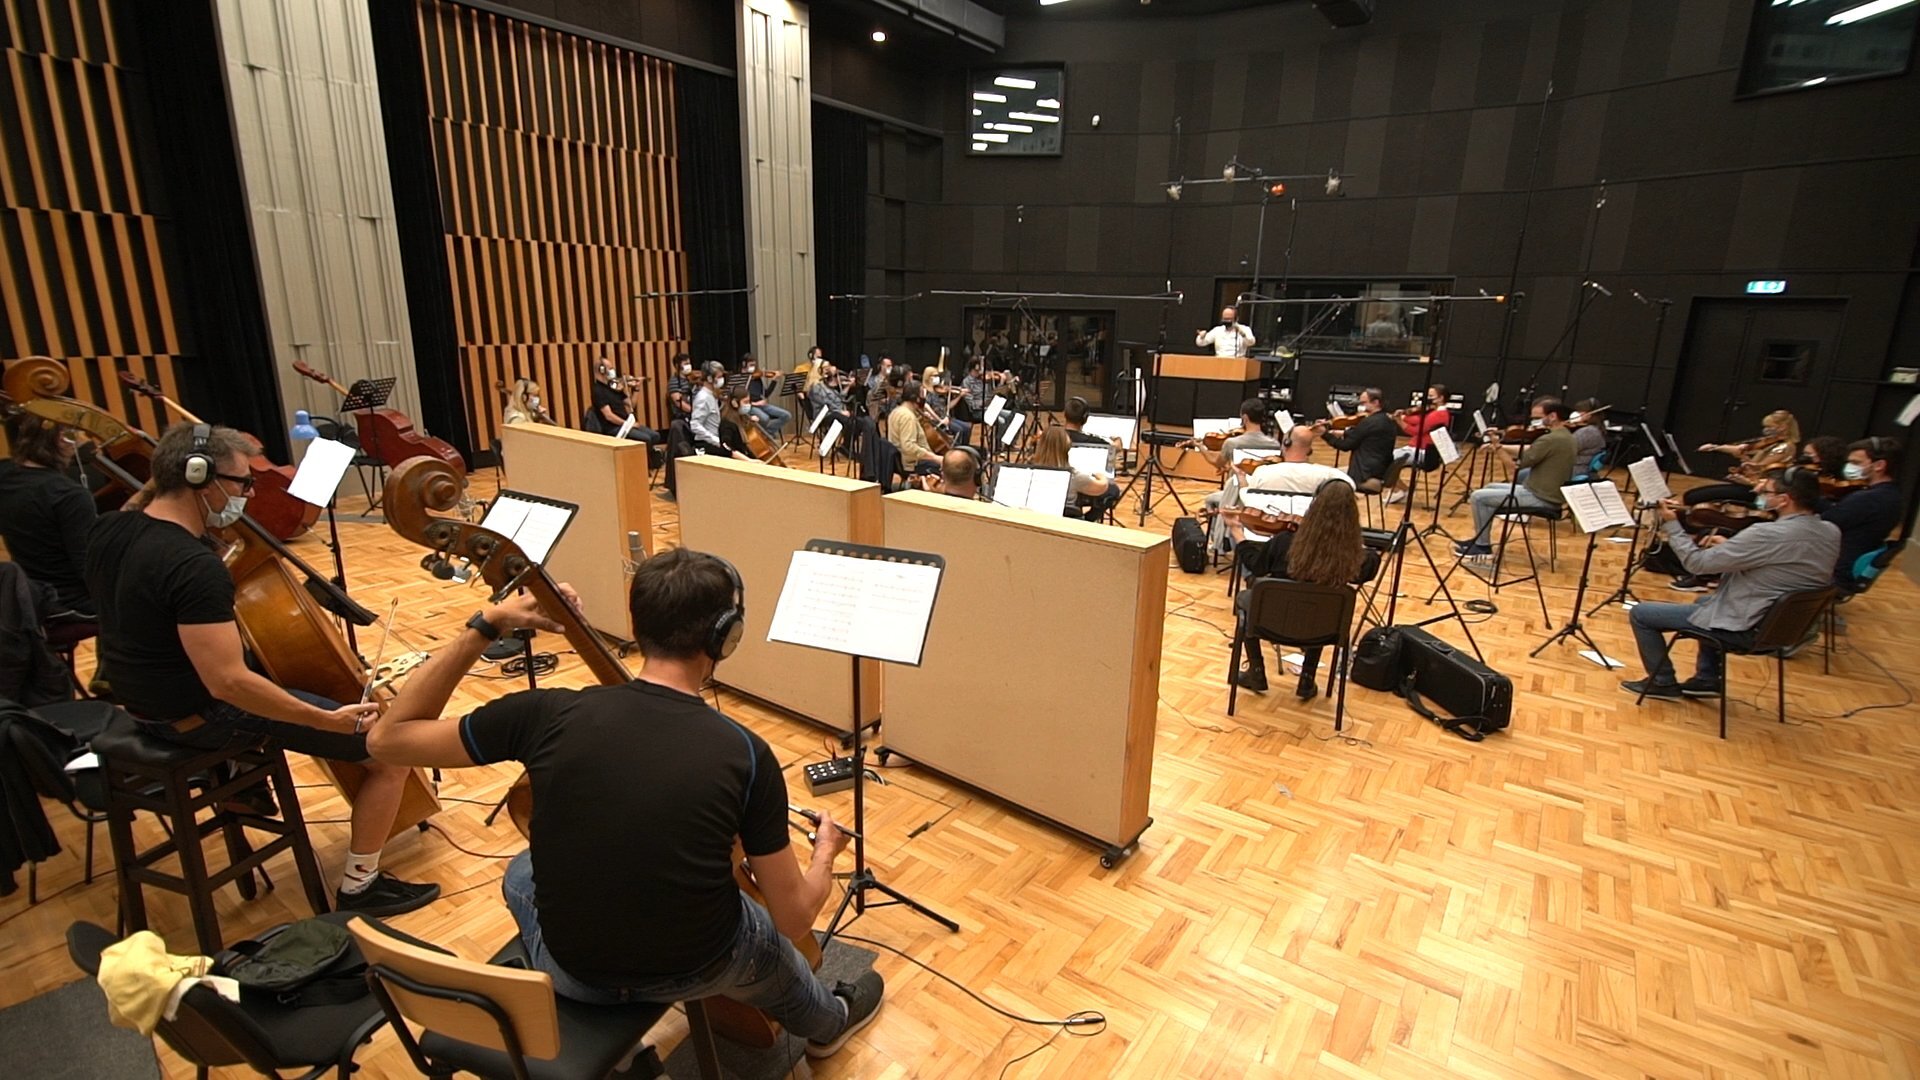  Unsilenced (2021) strings session with Macedonian Symphonic Orchestra Fames 